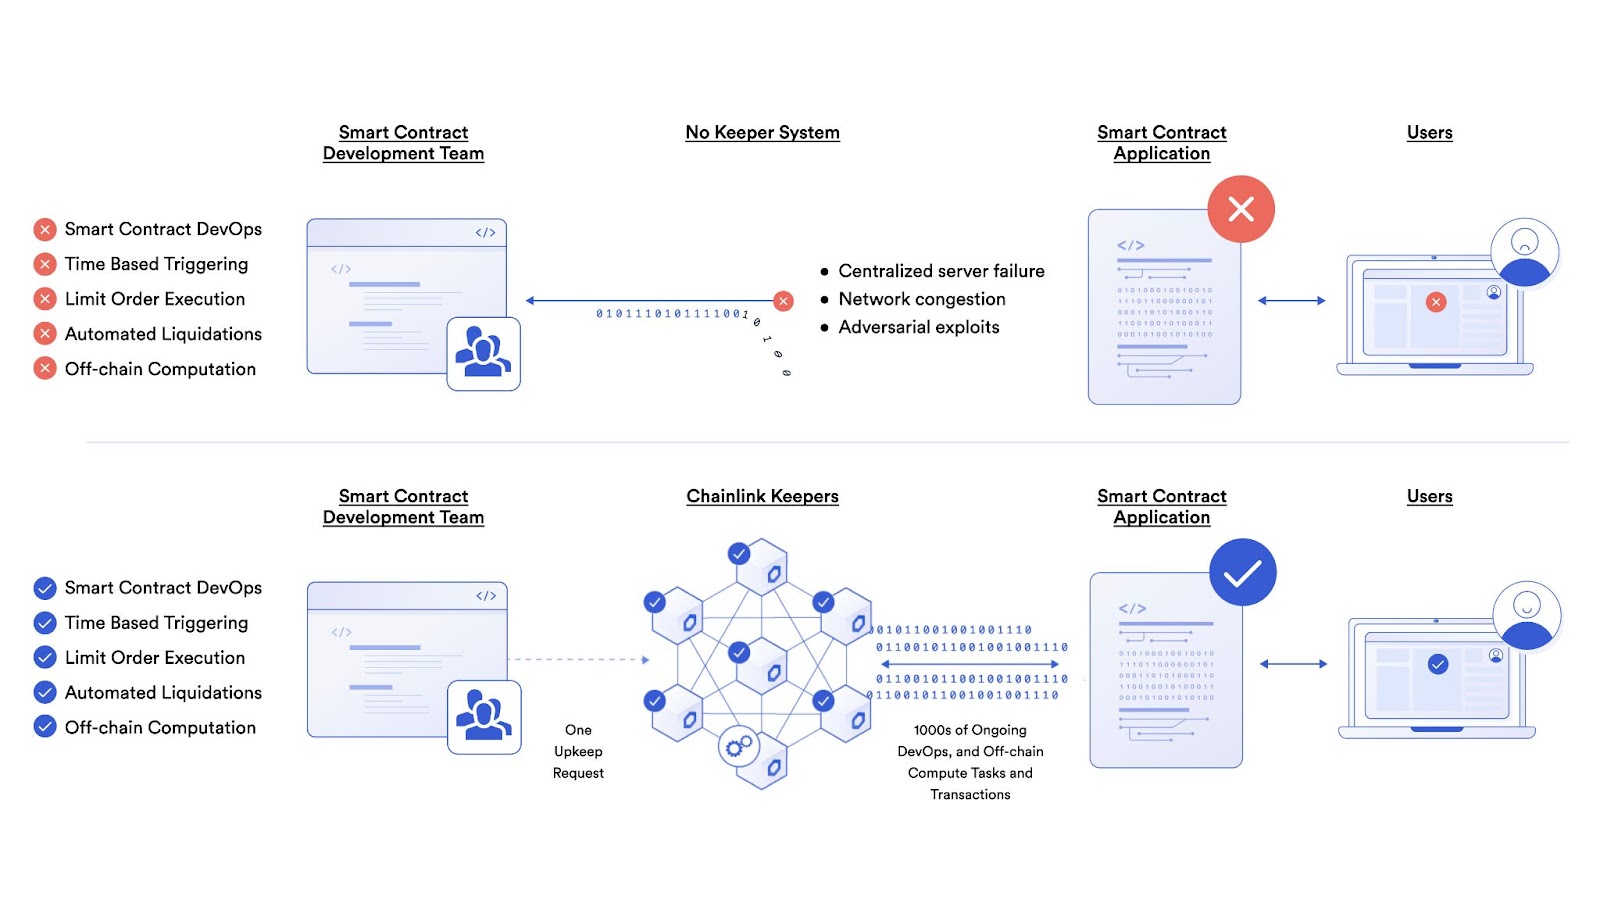 A diagram showing how Chainlink Keepers enhance smart contract applications.